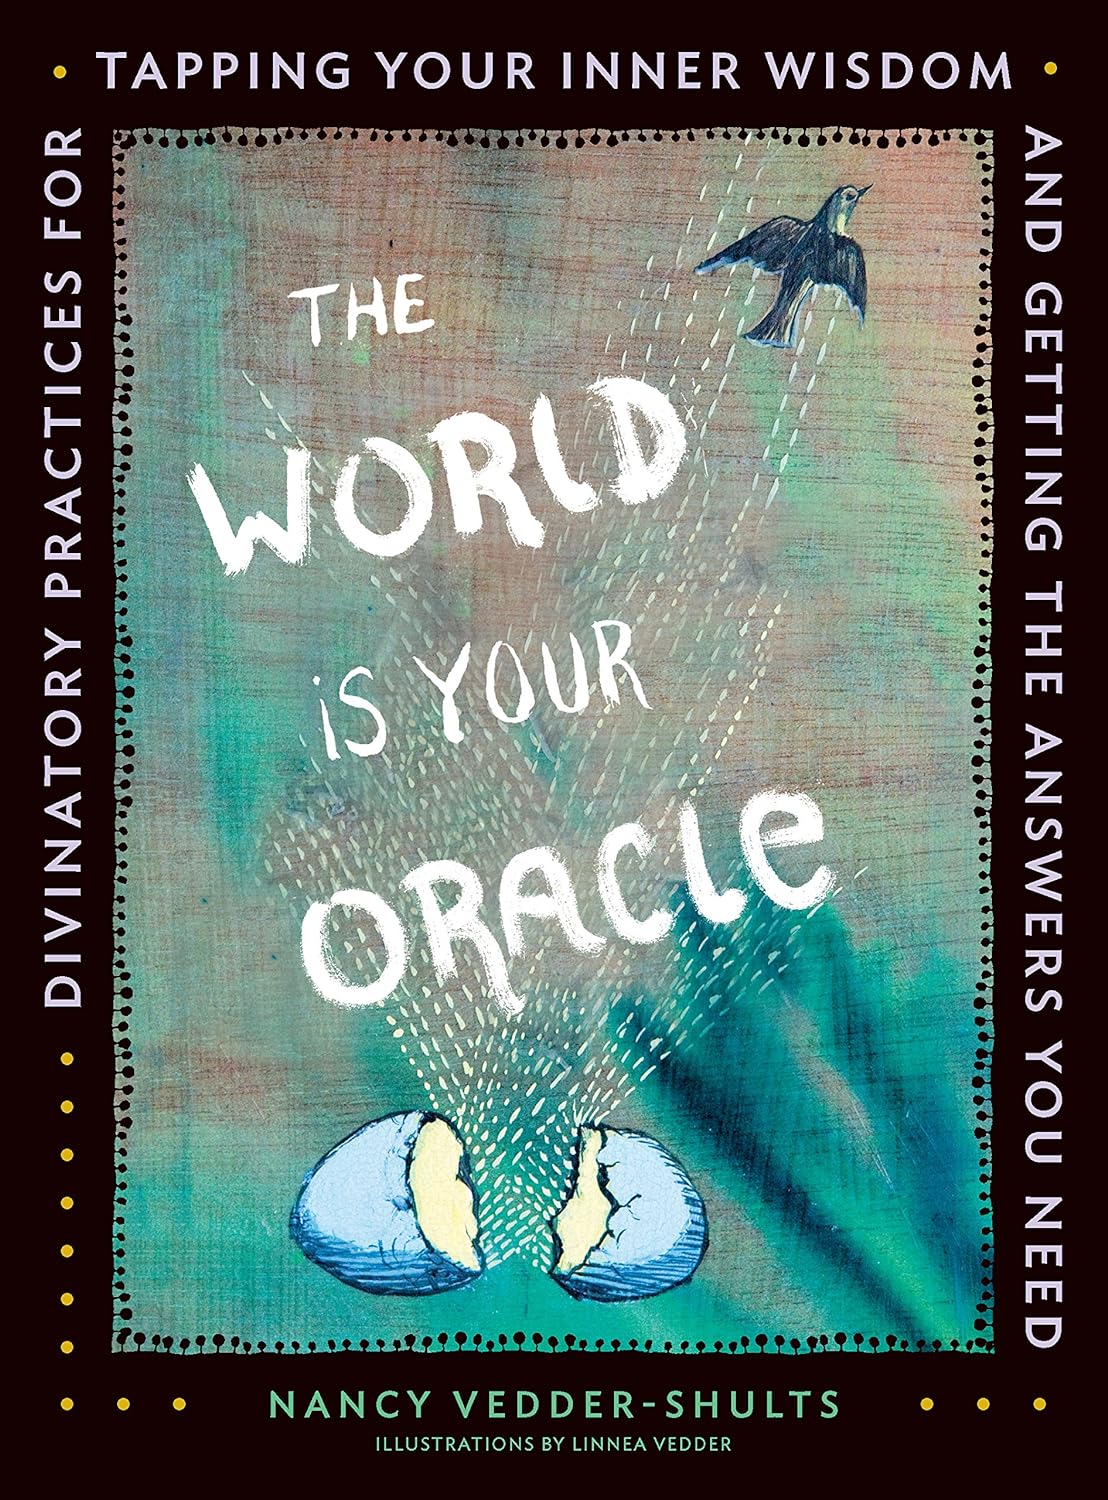 The World Is Your Oracle